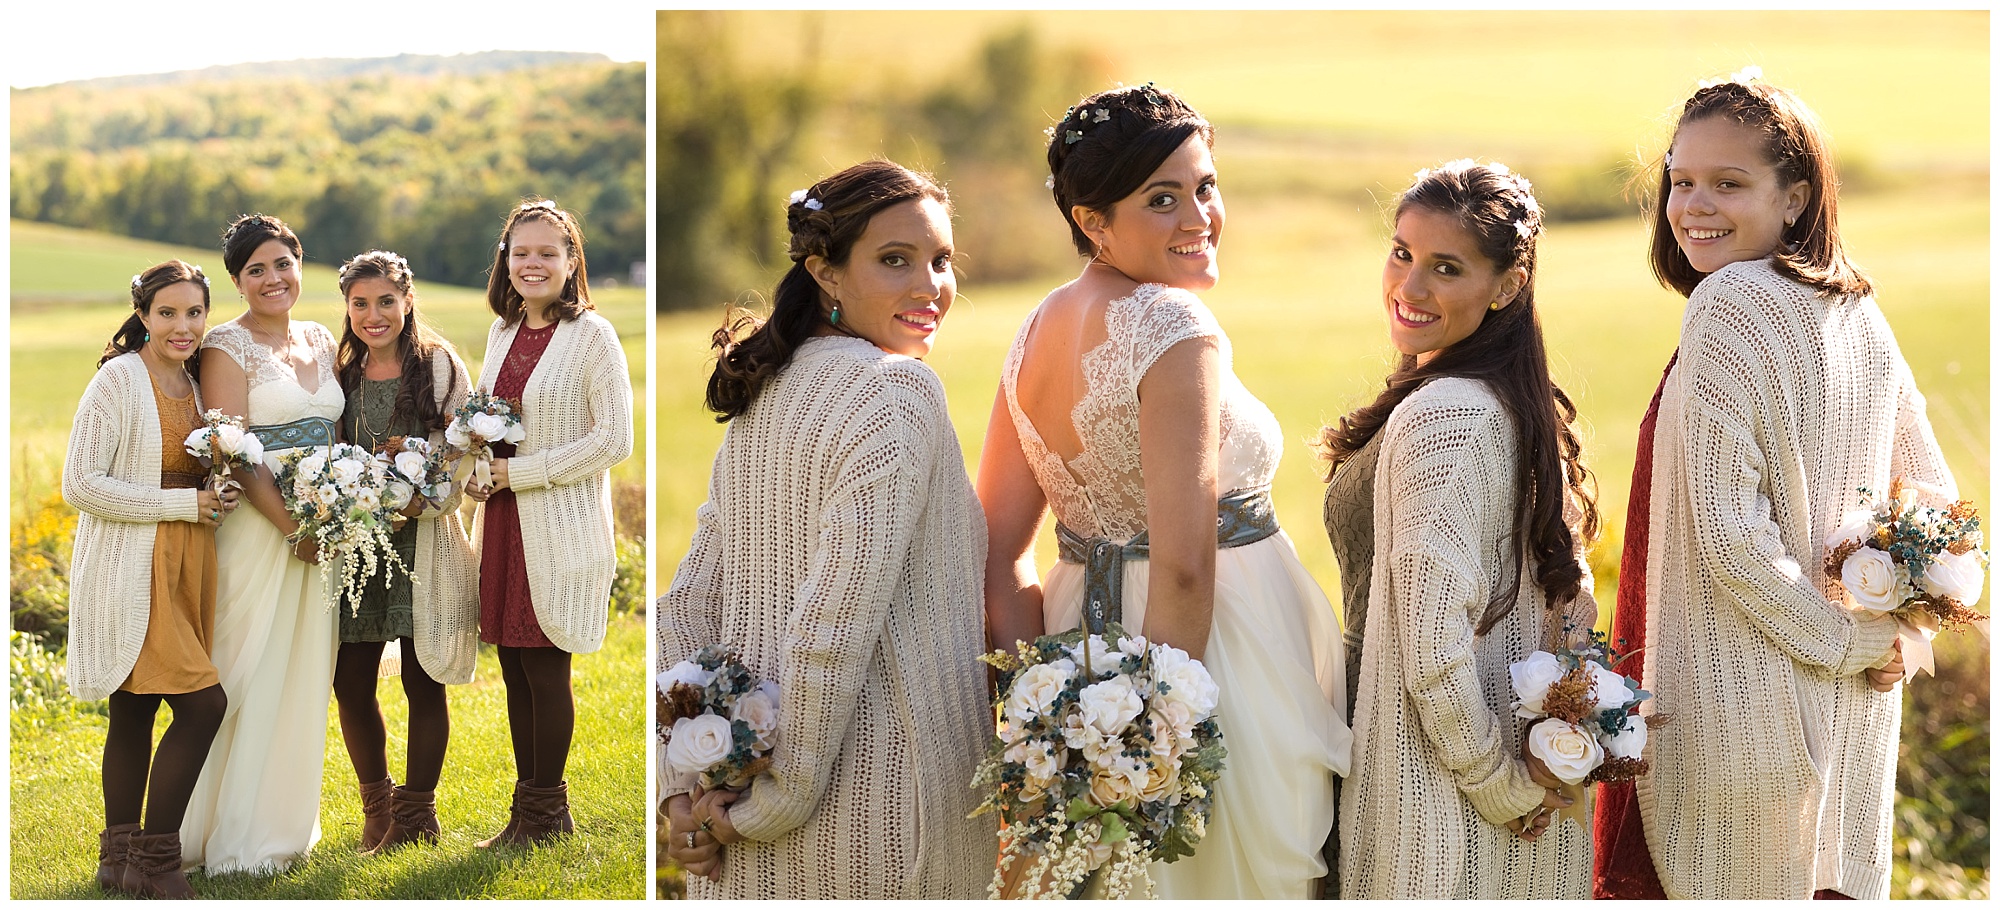 The bride and her girls with flowers in hand in these two photos